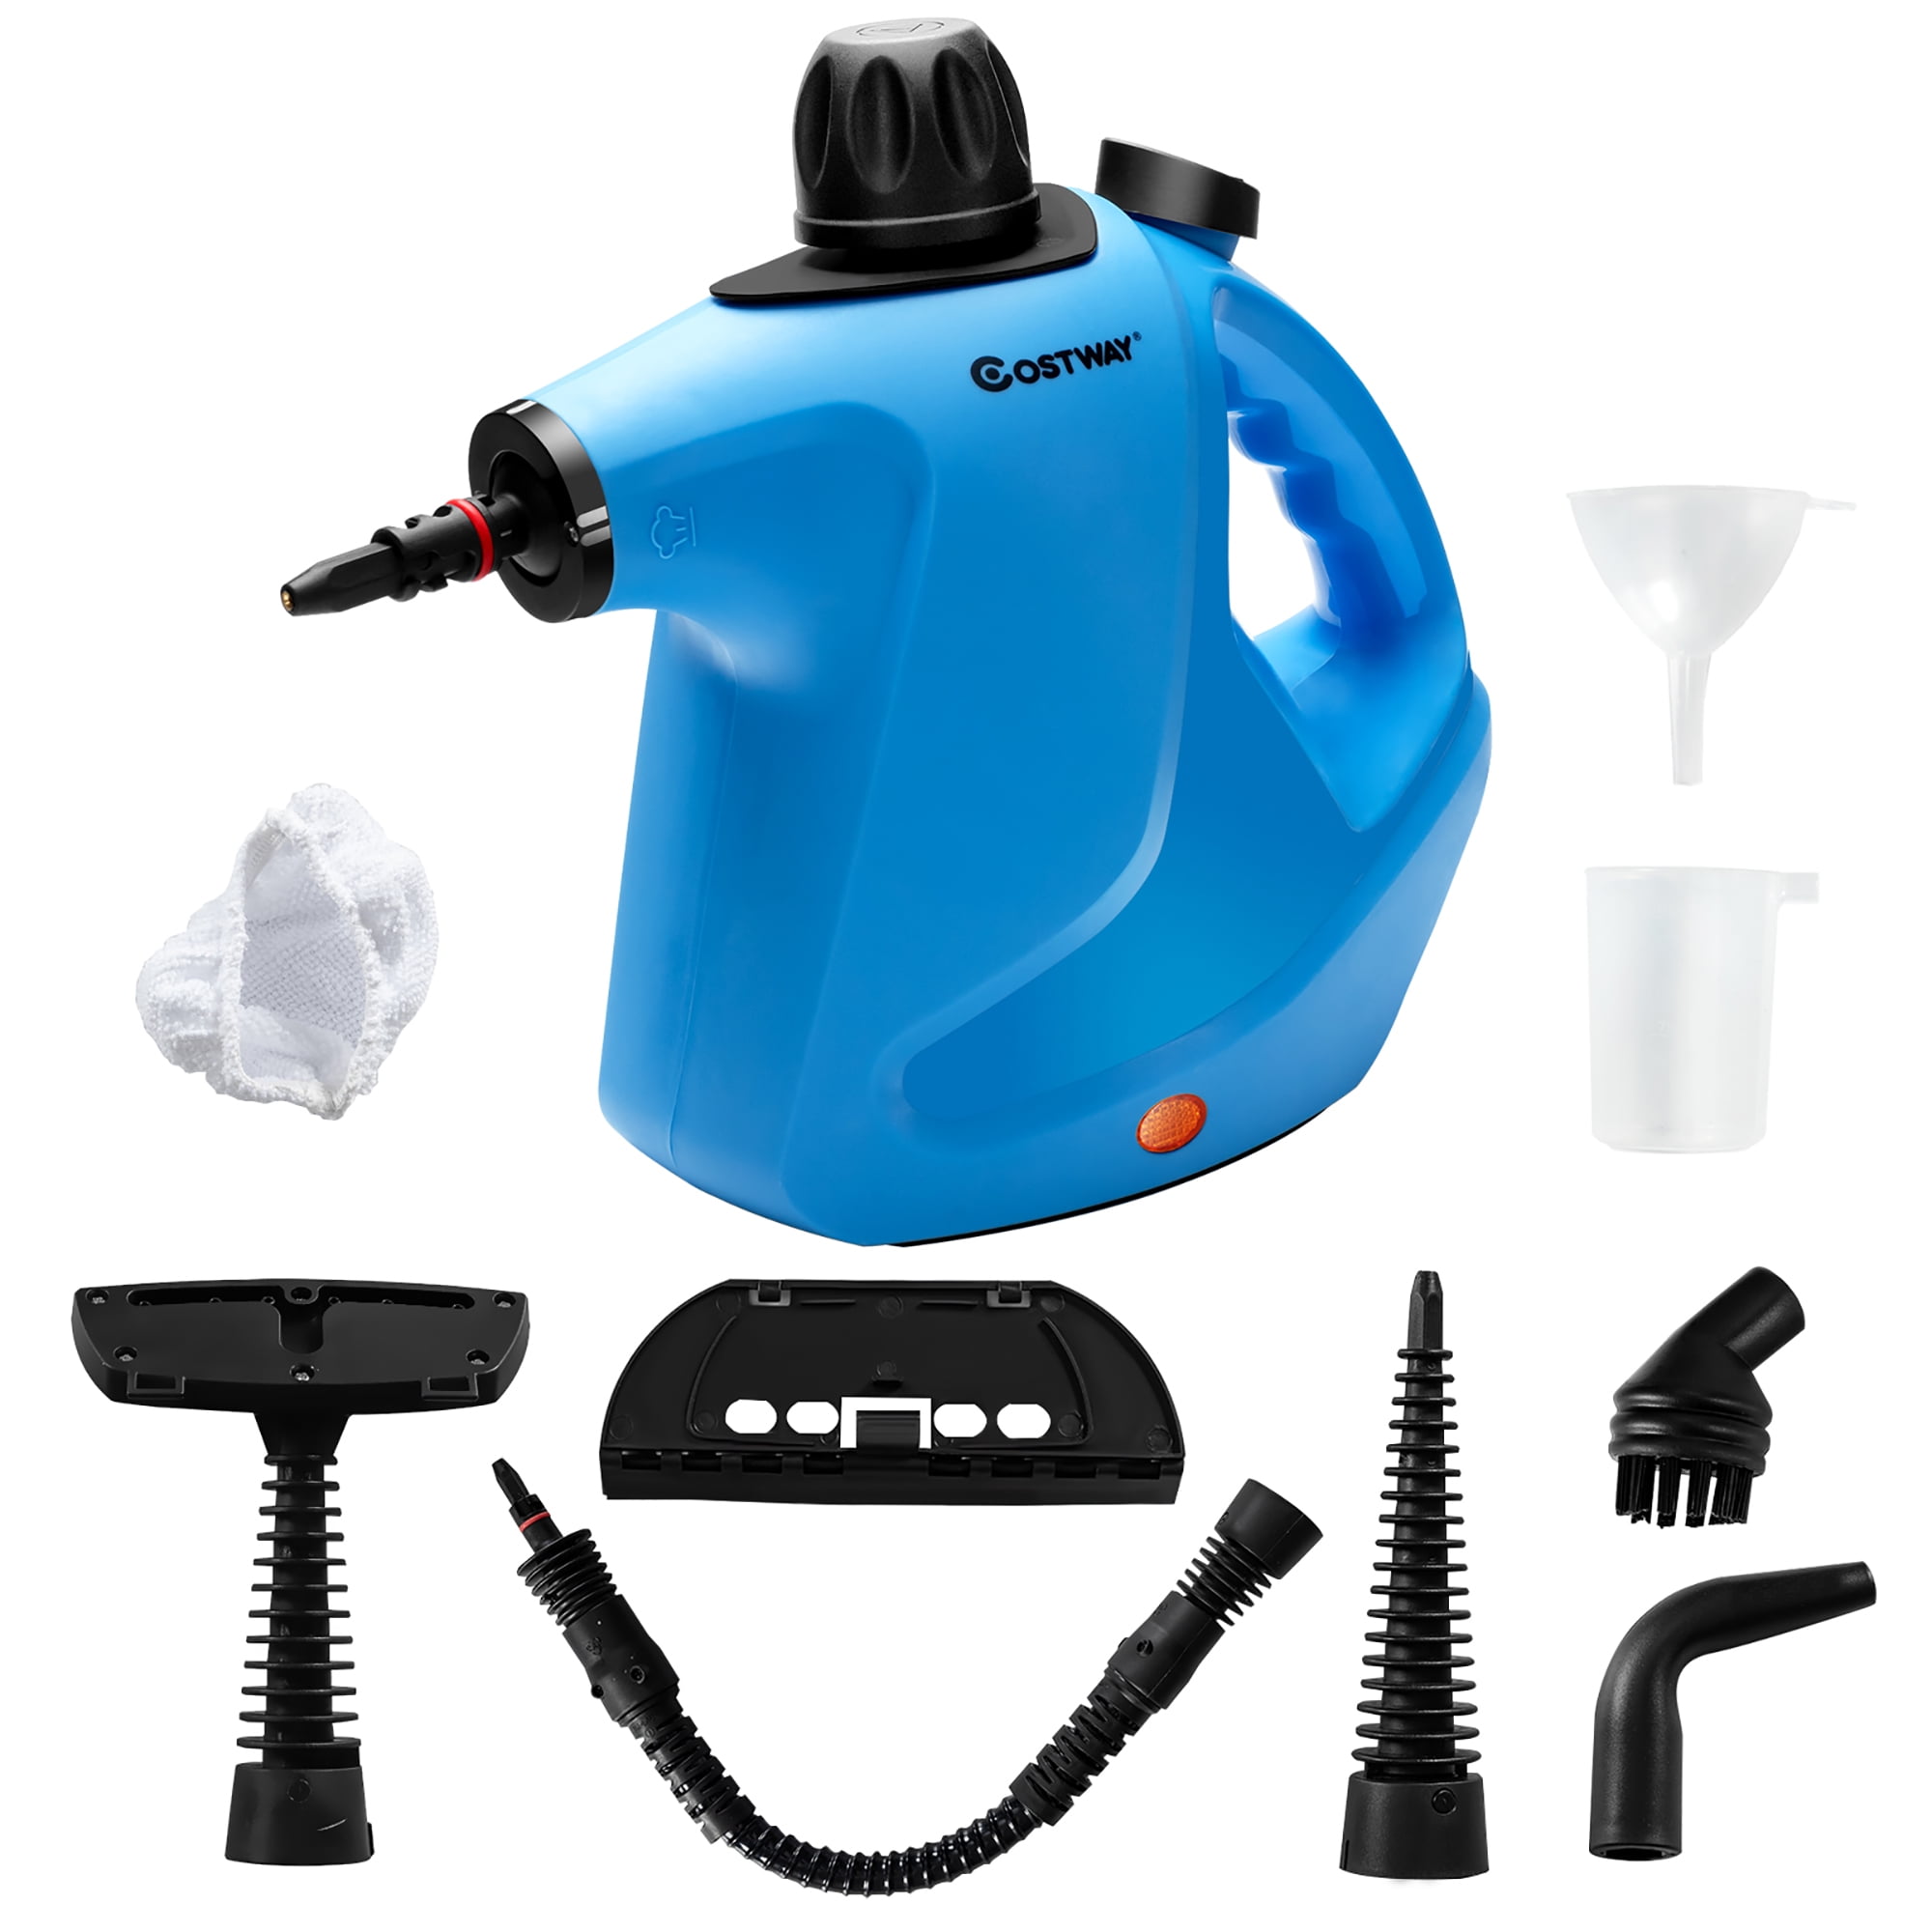 1050W Electric Steam Cleaner Portable Hand Held Powerful Steamer Cleaning Set 